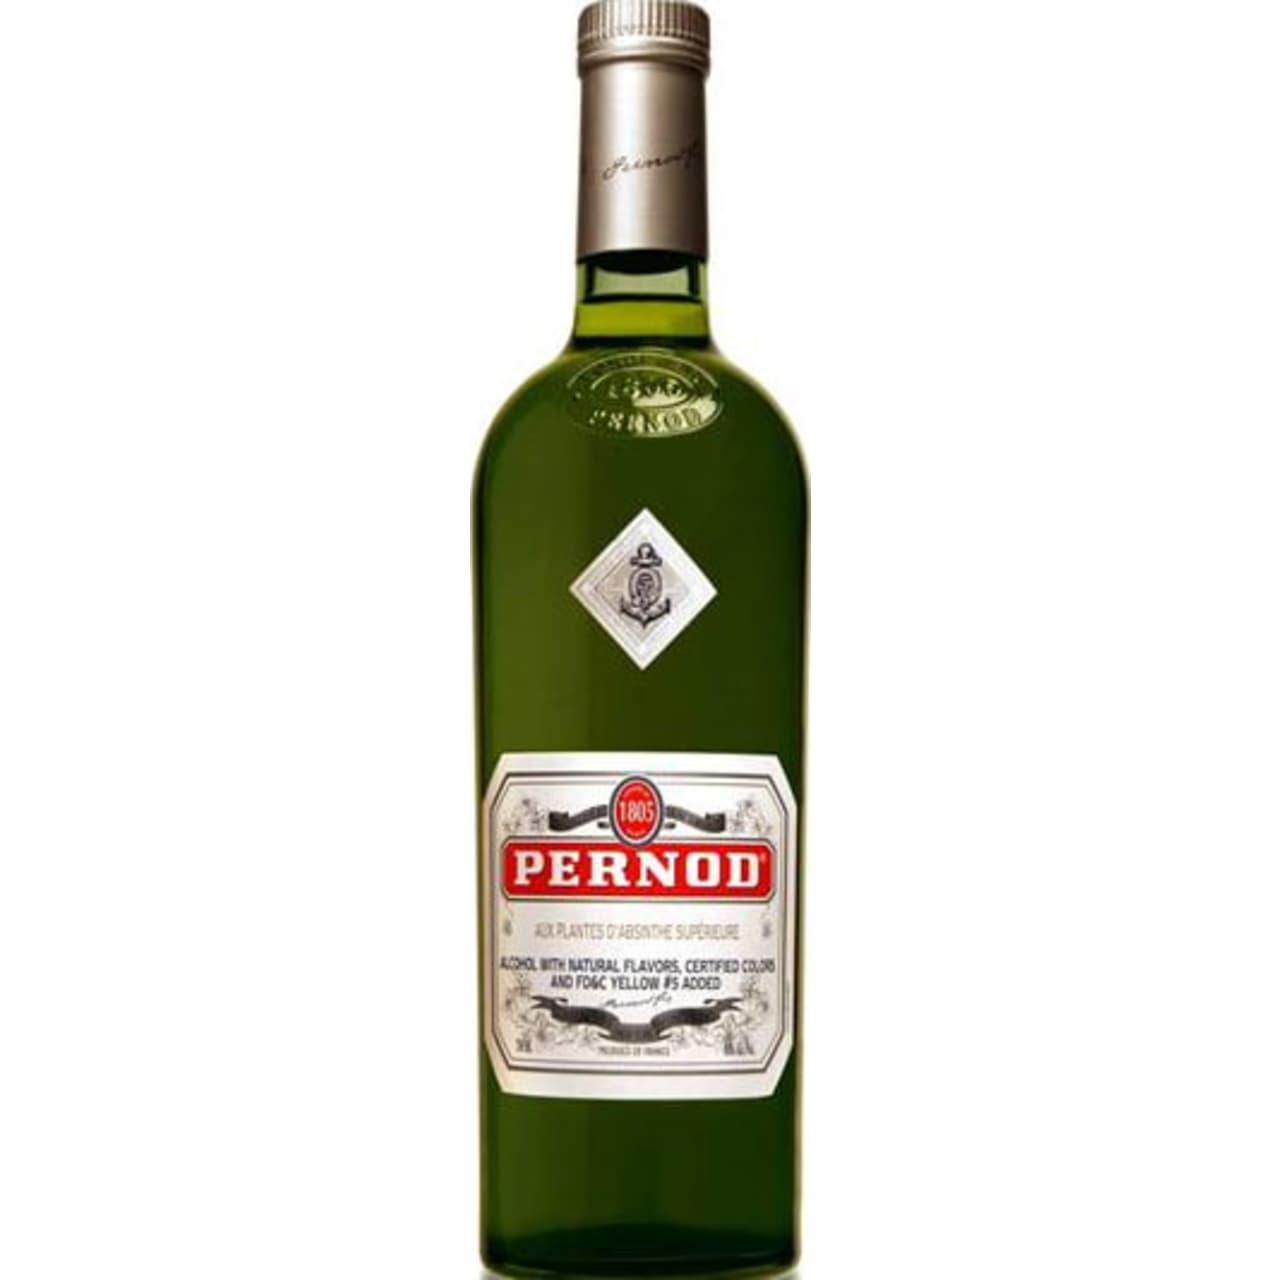 Pernod is made from the essence of star anise, with fruits from trees growing in North Vietnam.